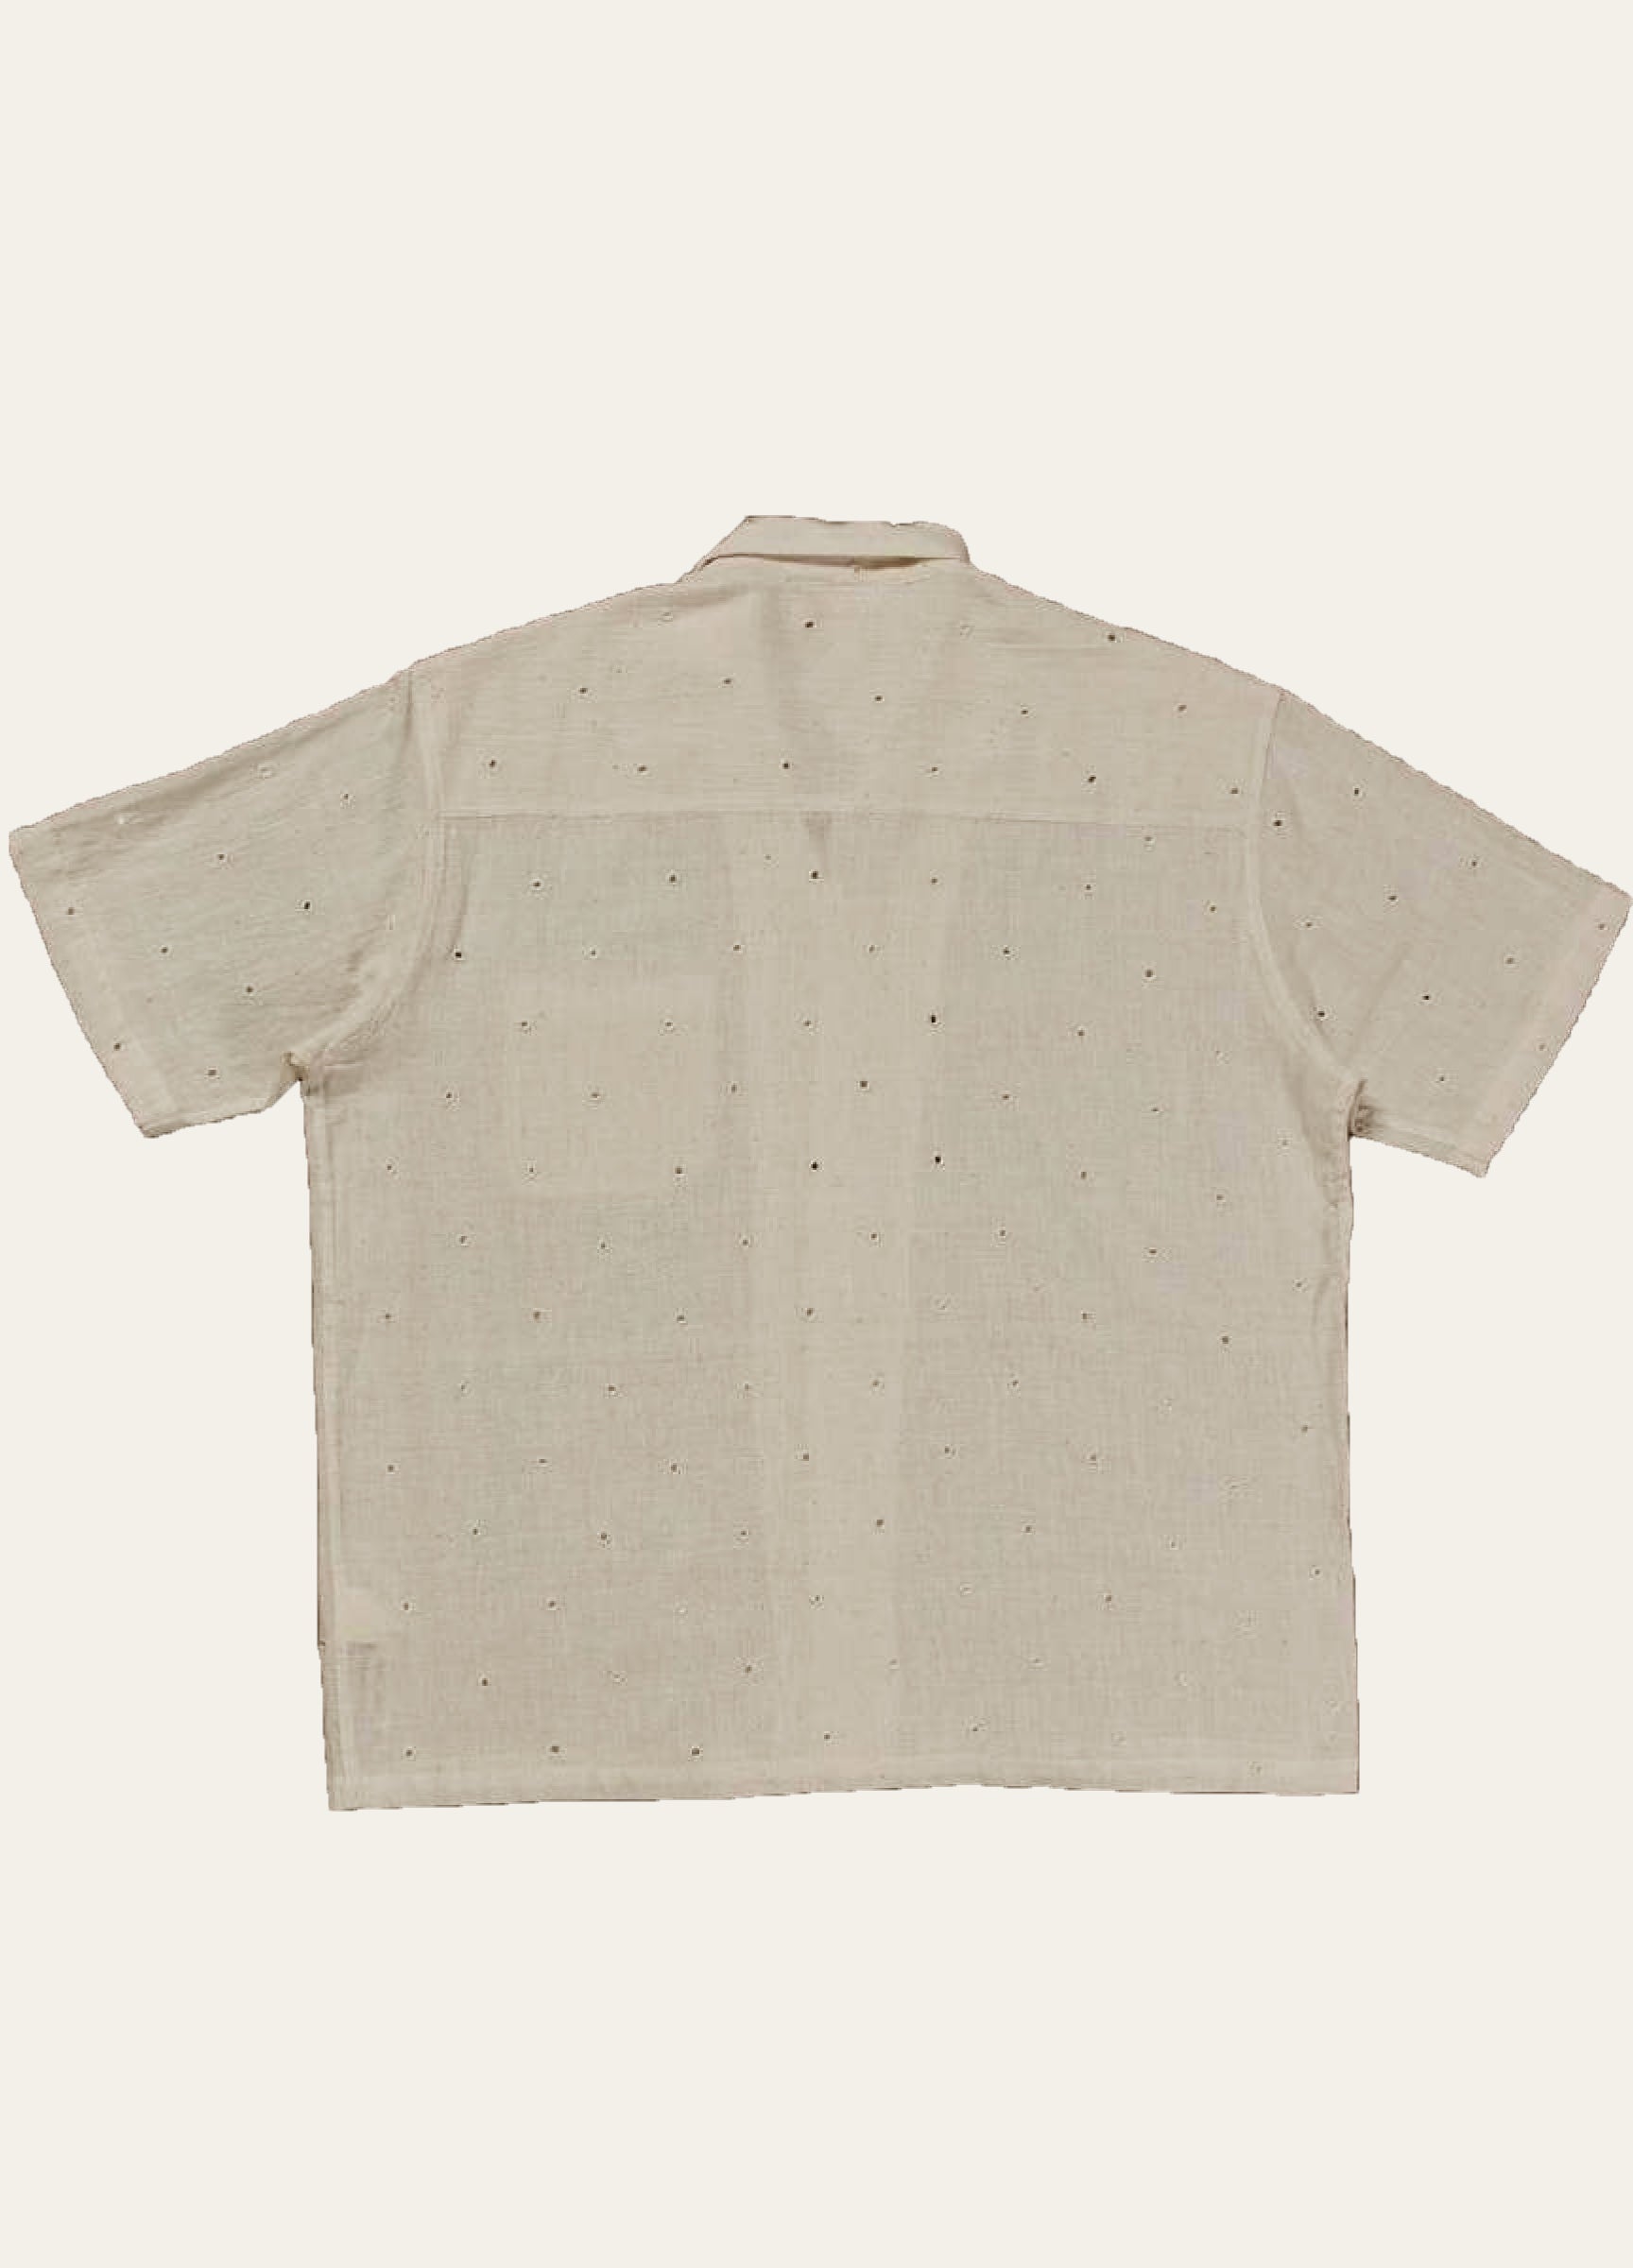 KARTIC RESEARCH Mirror Embroidery Camp Shirt LEO BOUTIQUE